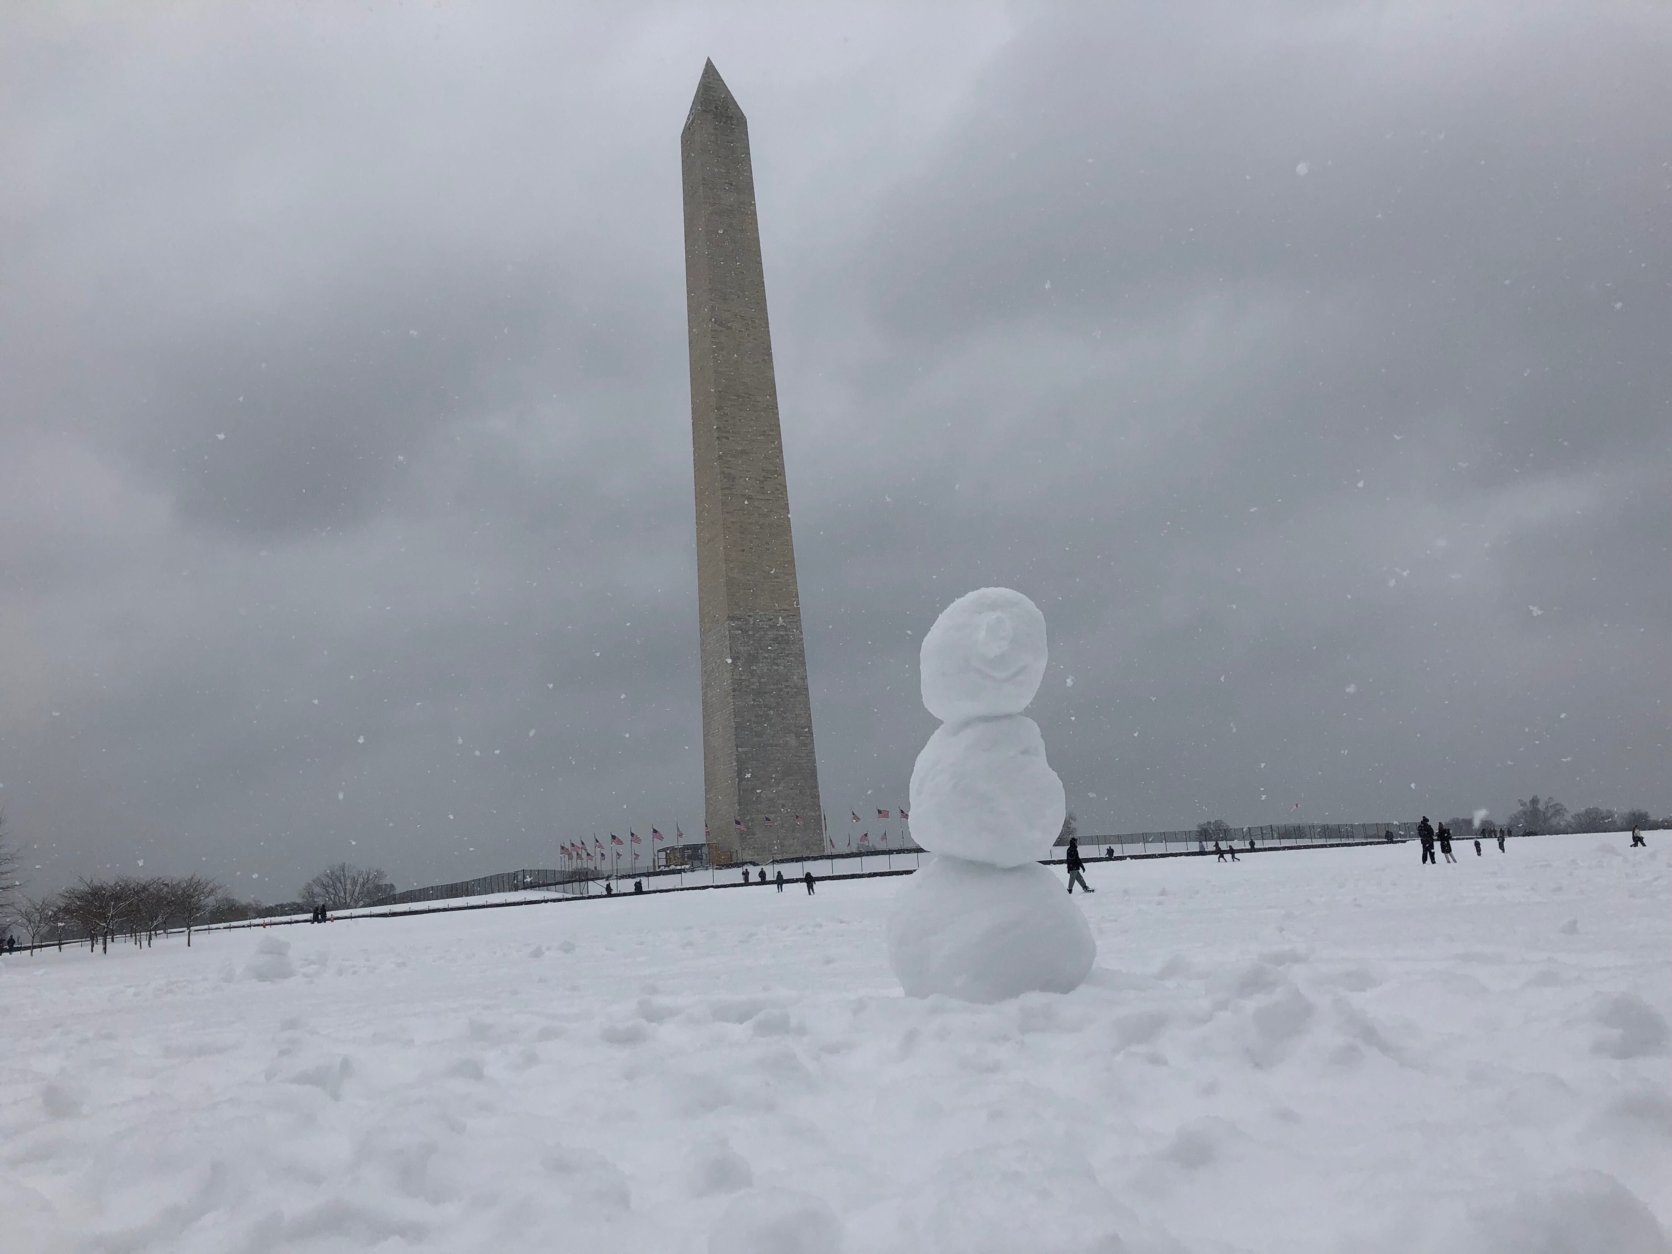 The Washington Monument towers over a snowman built on the National Mall. (WTOP/Keara Dowd)